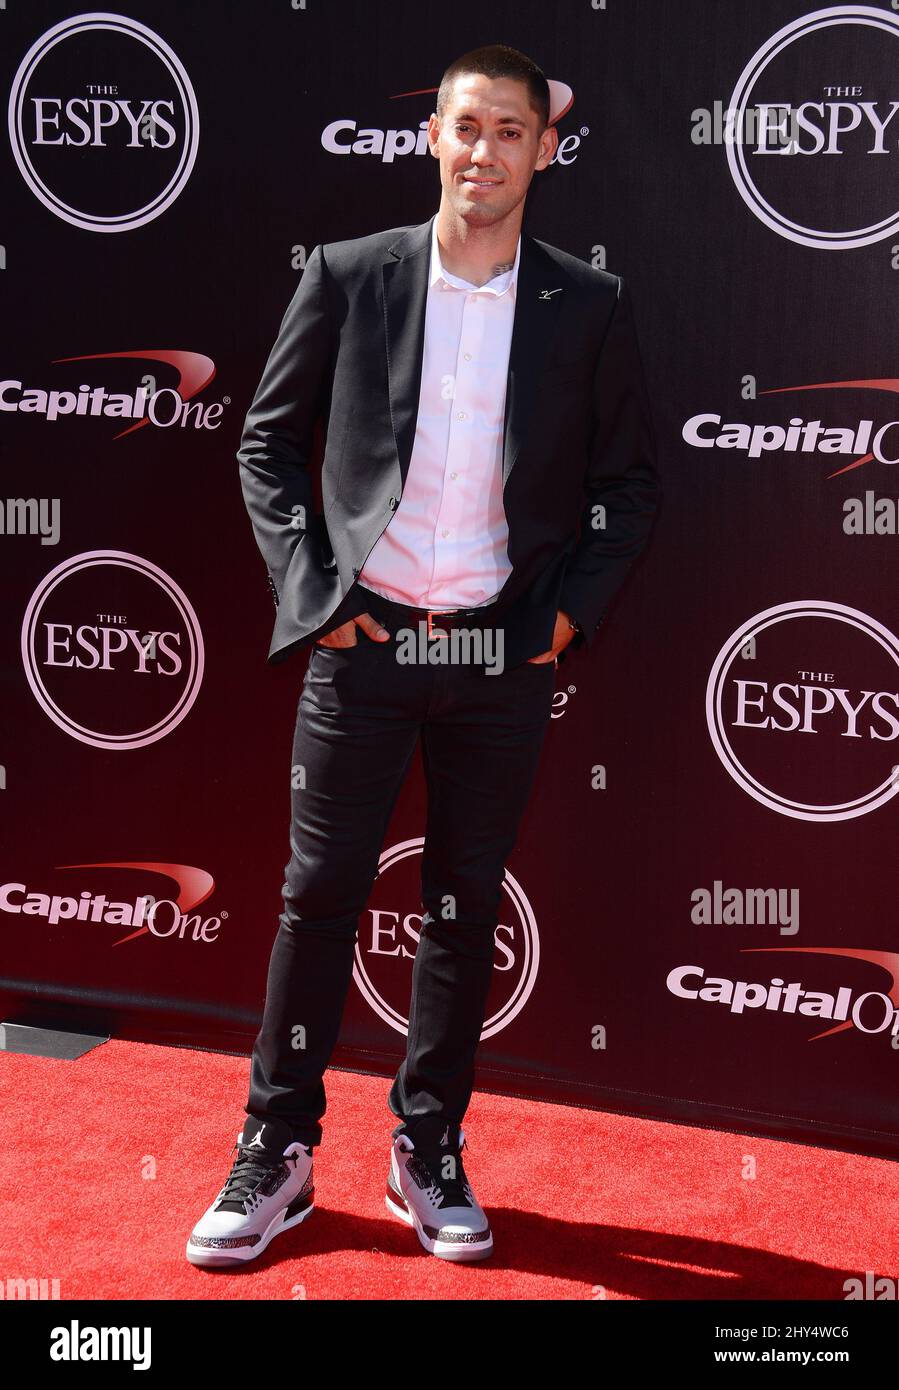 Clint Dempsey arriving at the 2014 ESPYS held at Nokia Theatre, L.A. Live. Stock Photo